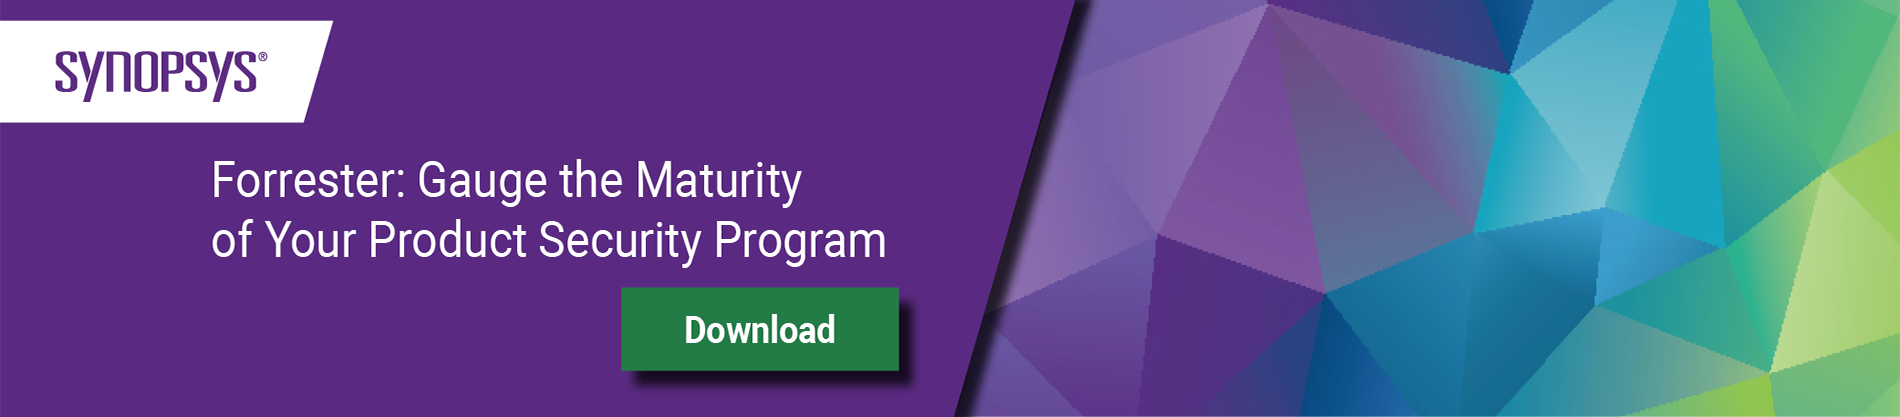 Forrester: Gauge the maturity of your product security program | Synopsys